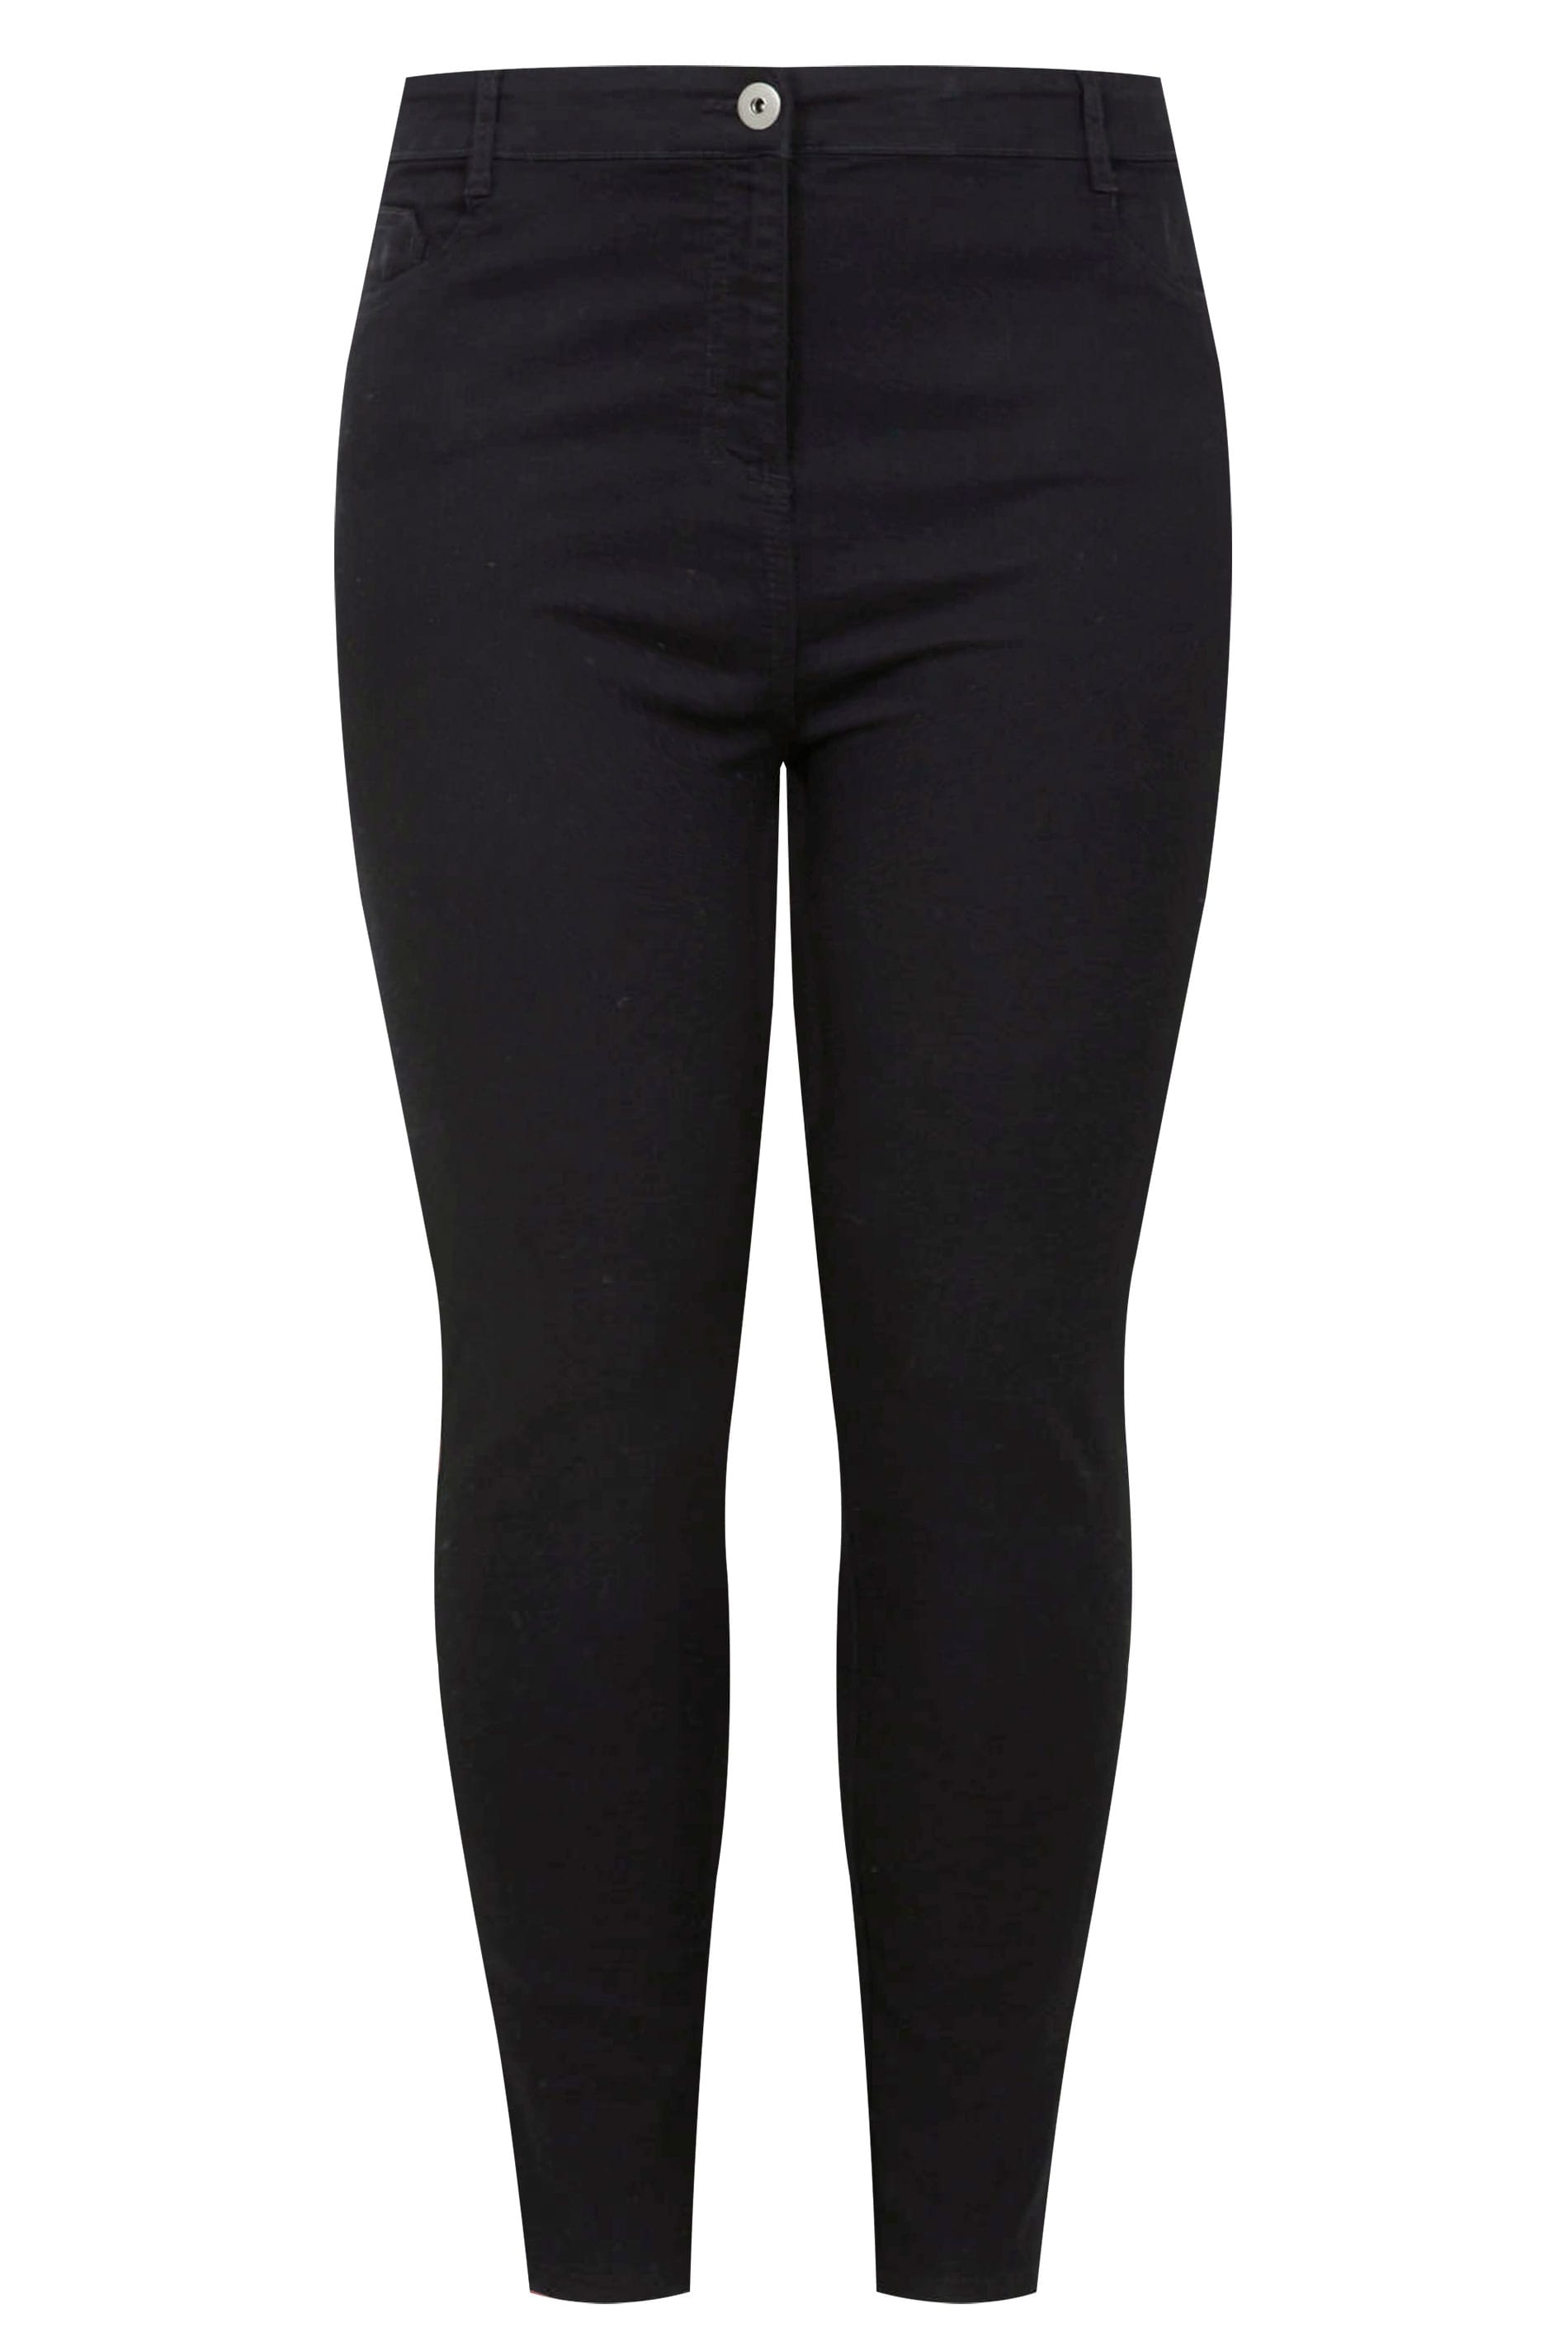 Plus Size Navy Blue Coated Skinny Stretch AVA Jeans